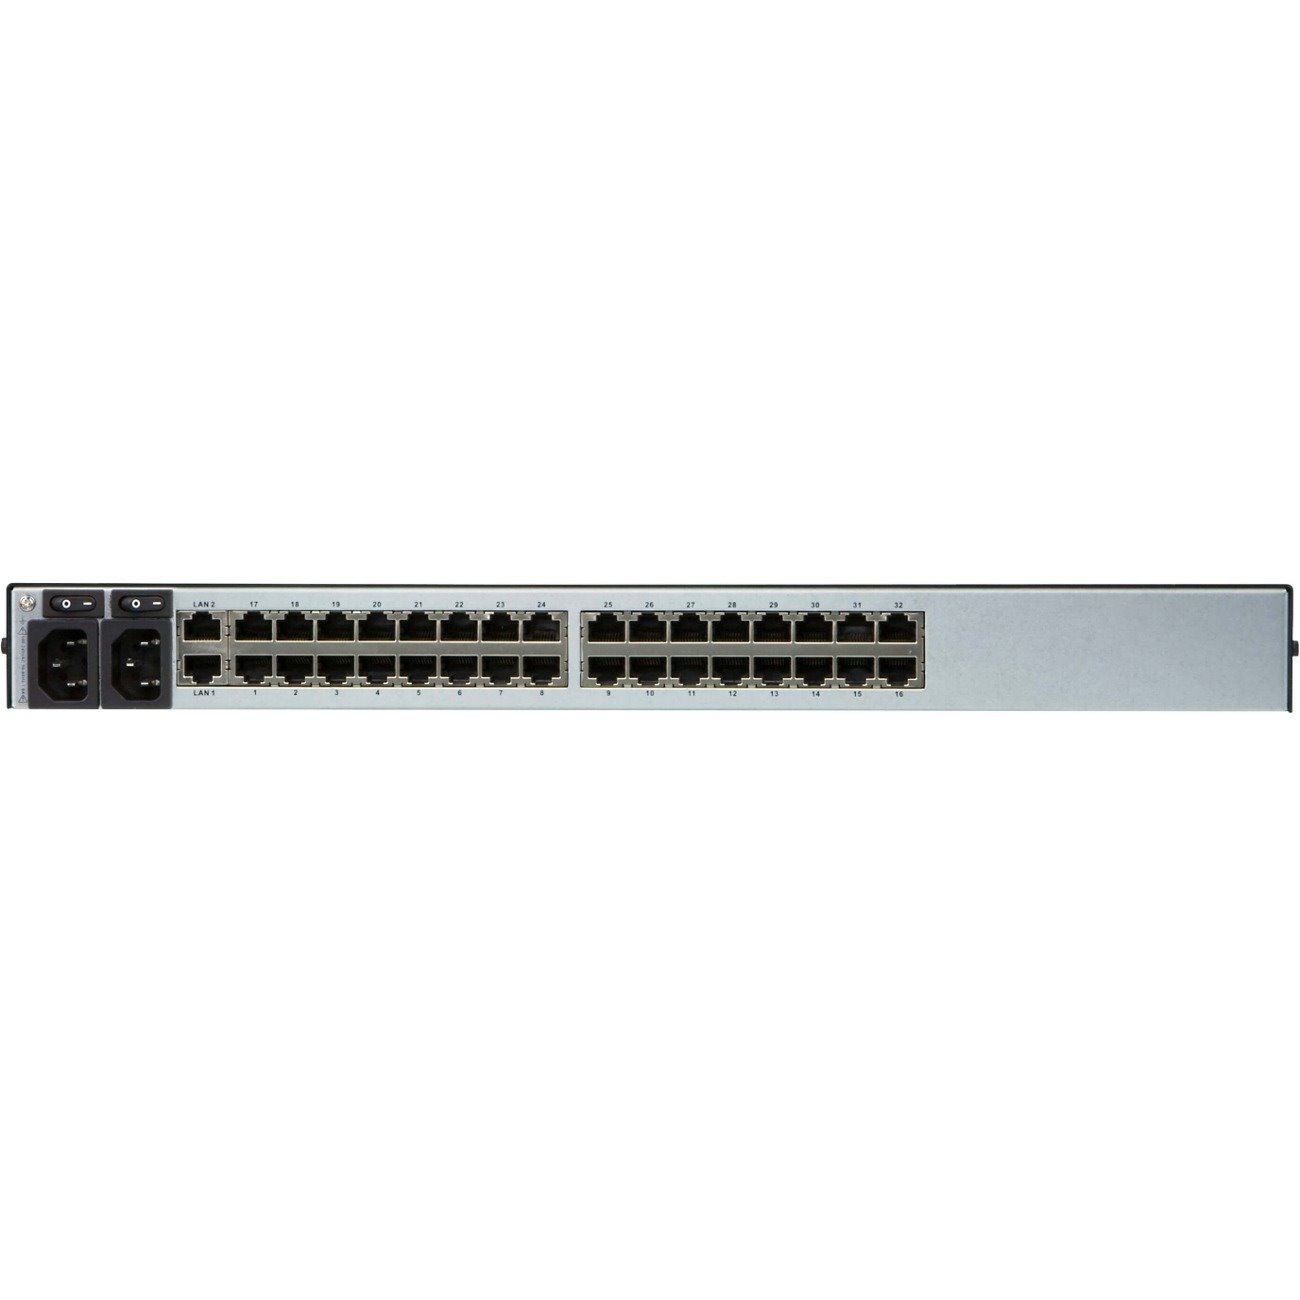 ATEN 32-Port Serial Console Server with Dual Power/LAN